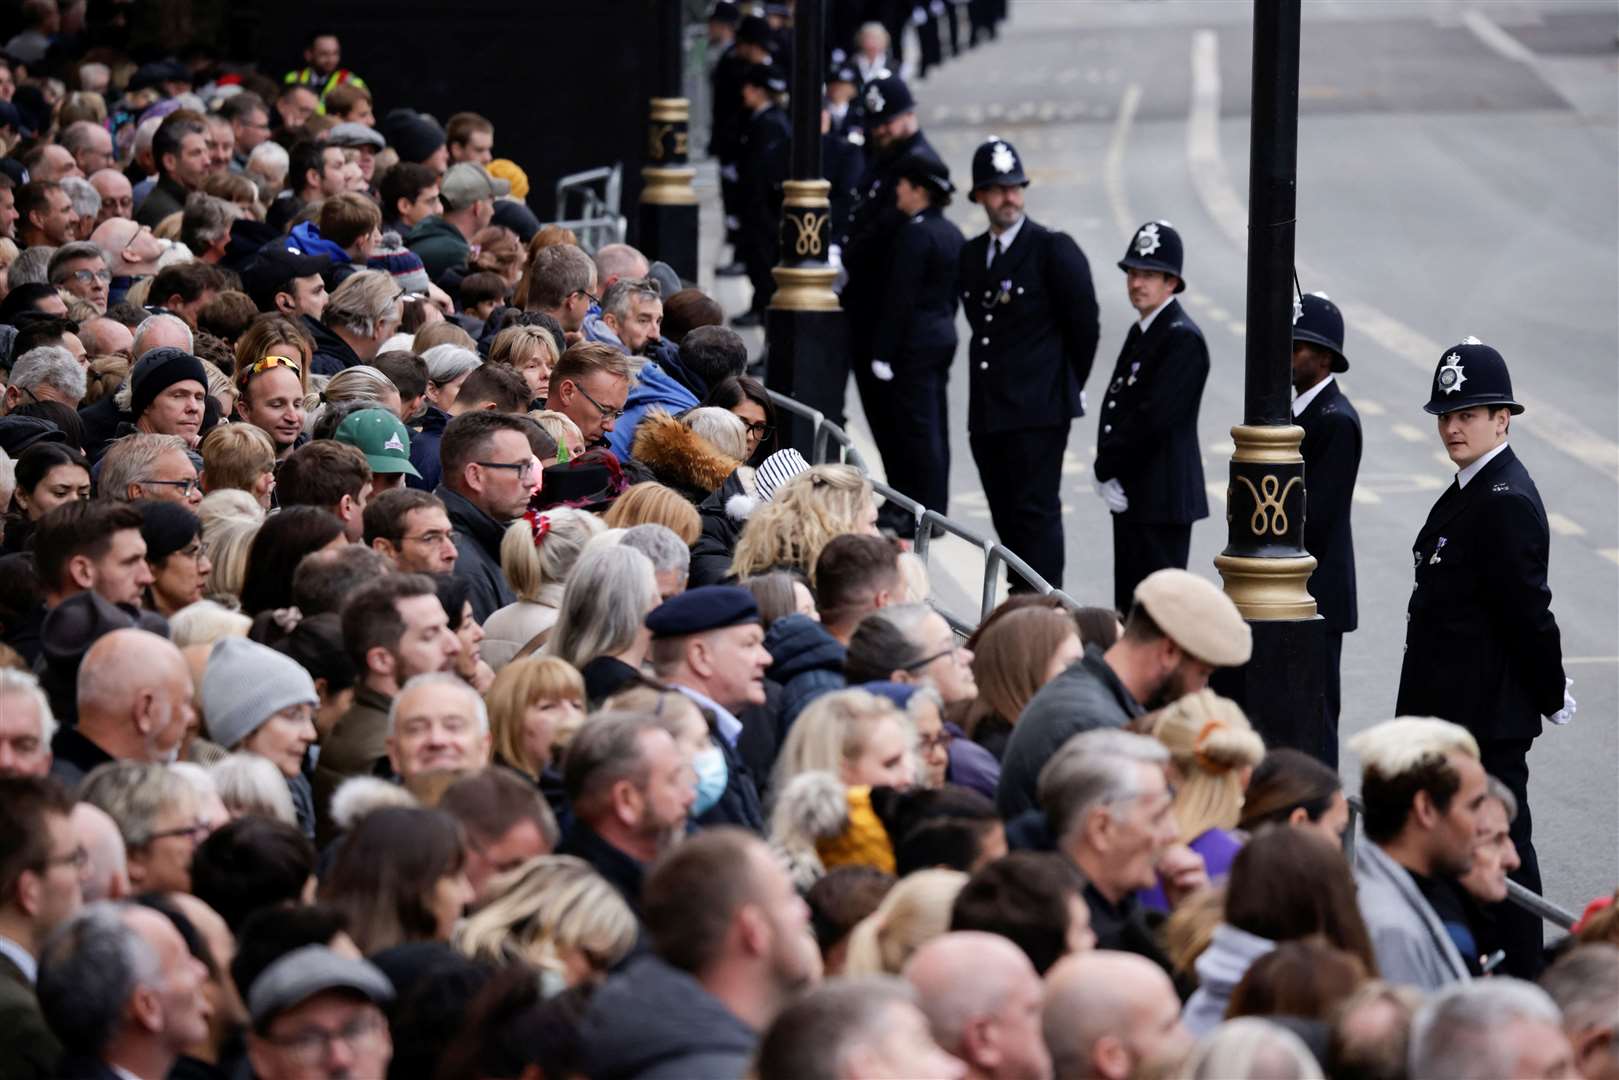 The crowd near Horse Guards in London ahead of the State Funeral of Queen Elizabeth II. Picture: PA